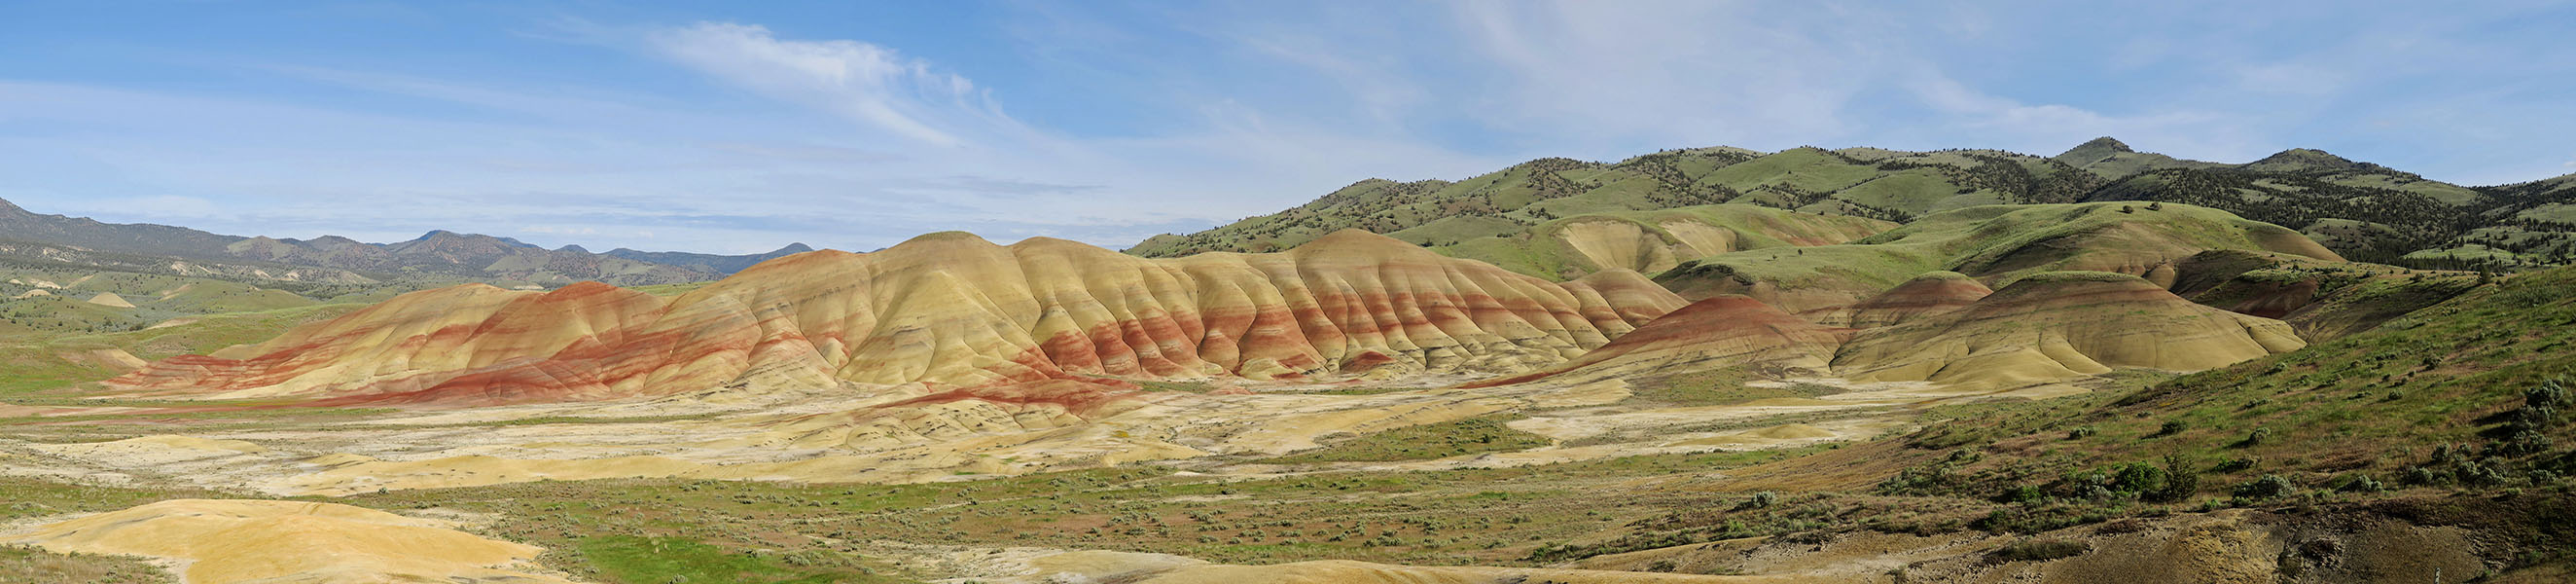 Painted Hills panorama [Painted Hills Unit, John Day Fossil Beds National Monument, Wheeler County, Oregon]